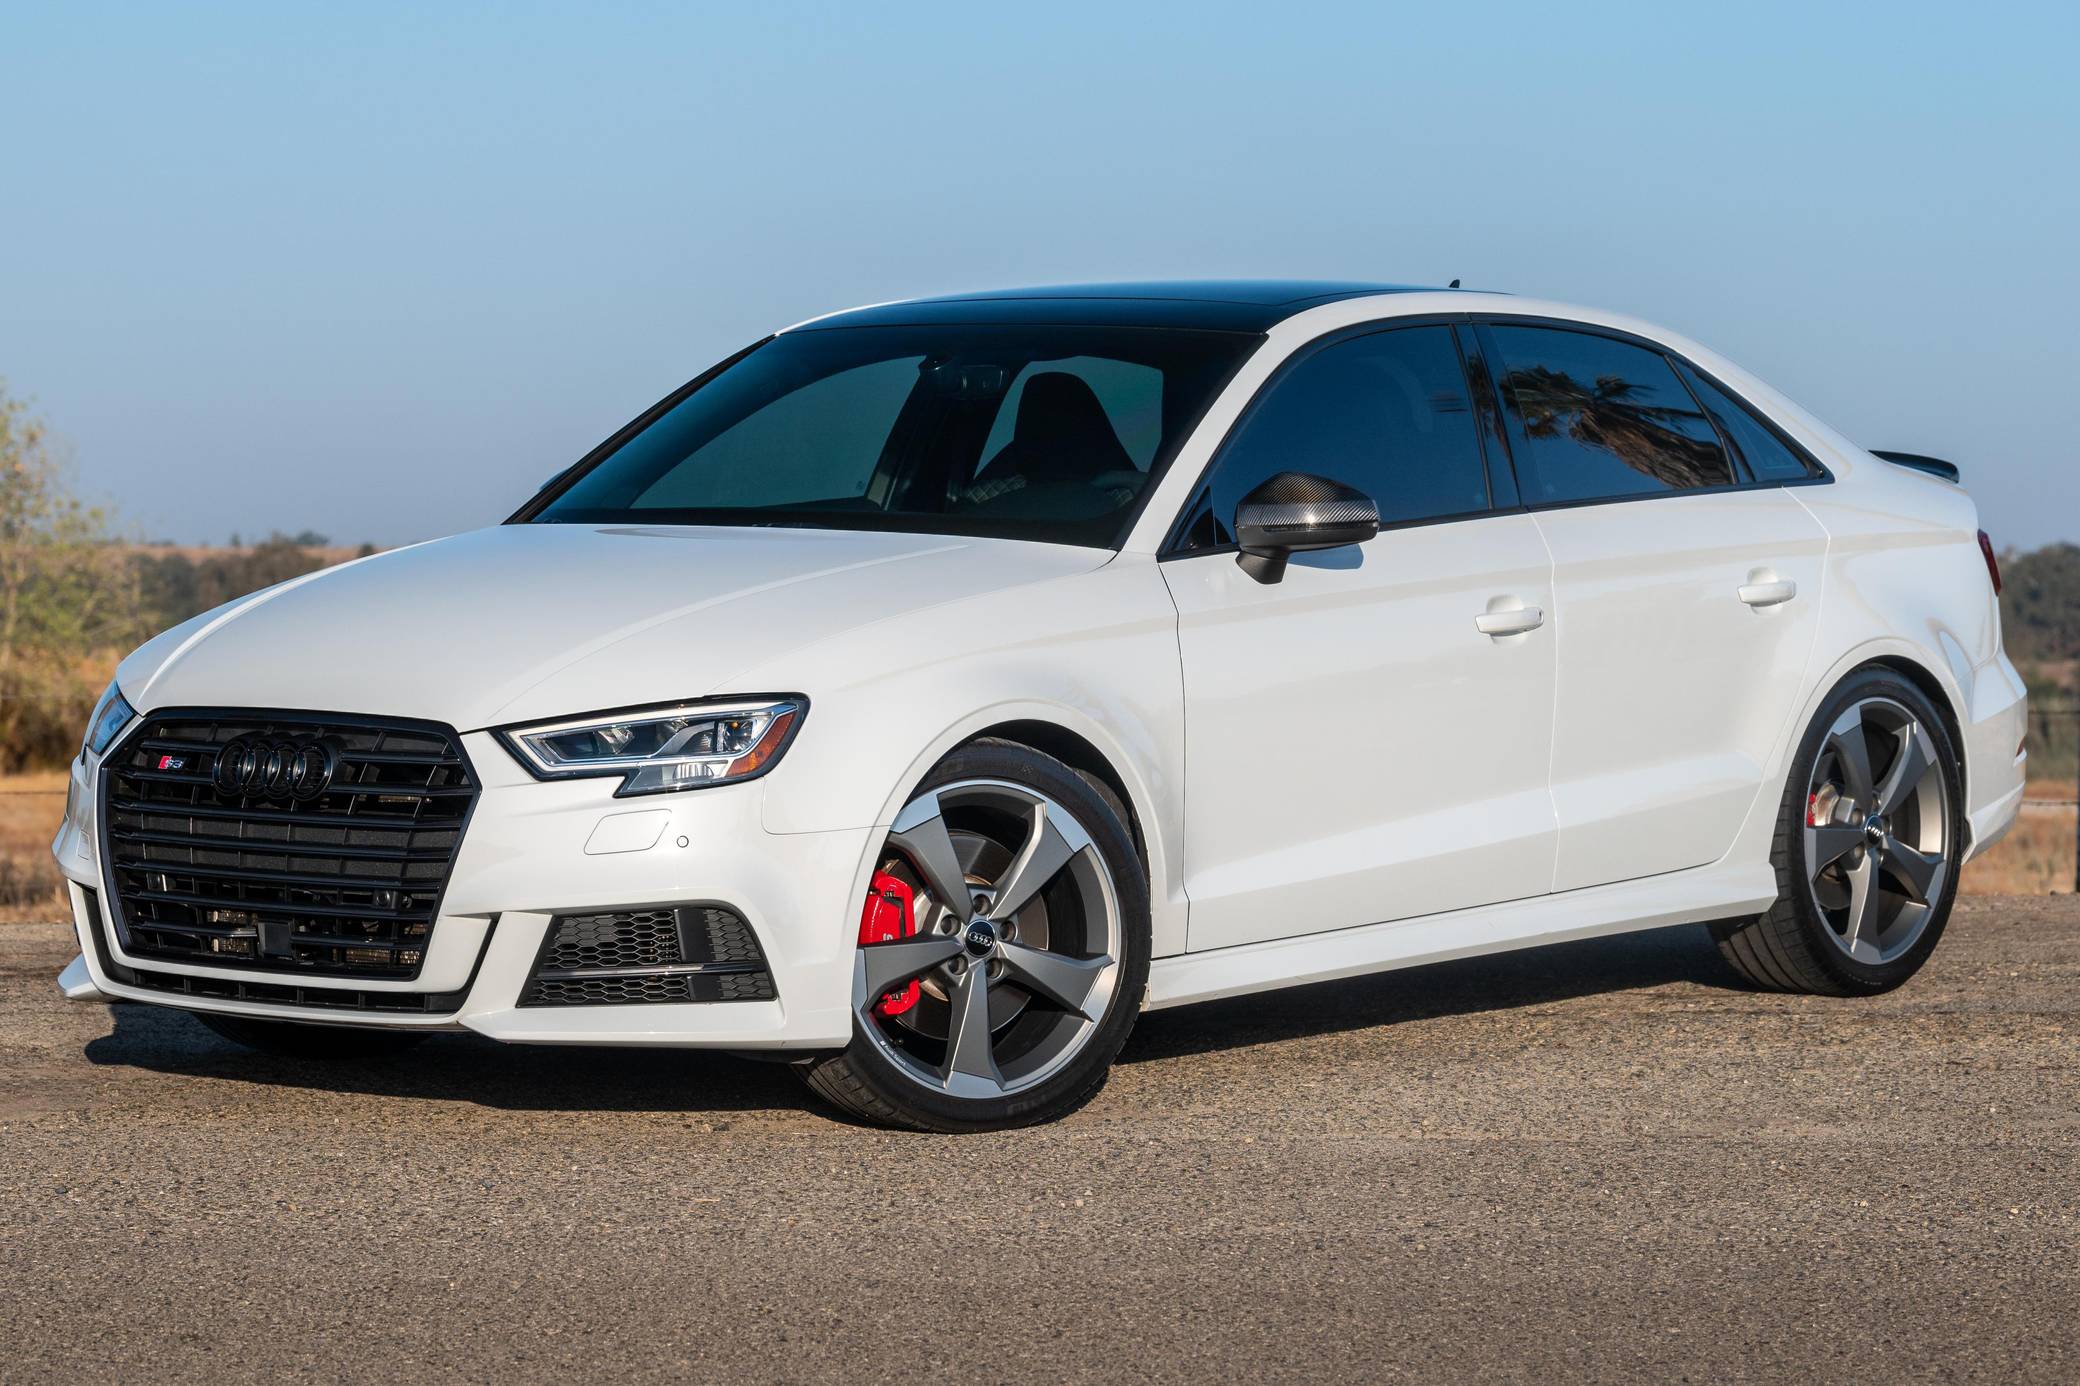 Auction and sale of 2014 AUDI S3 (8V) model - SoulAuto